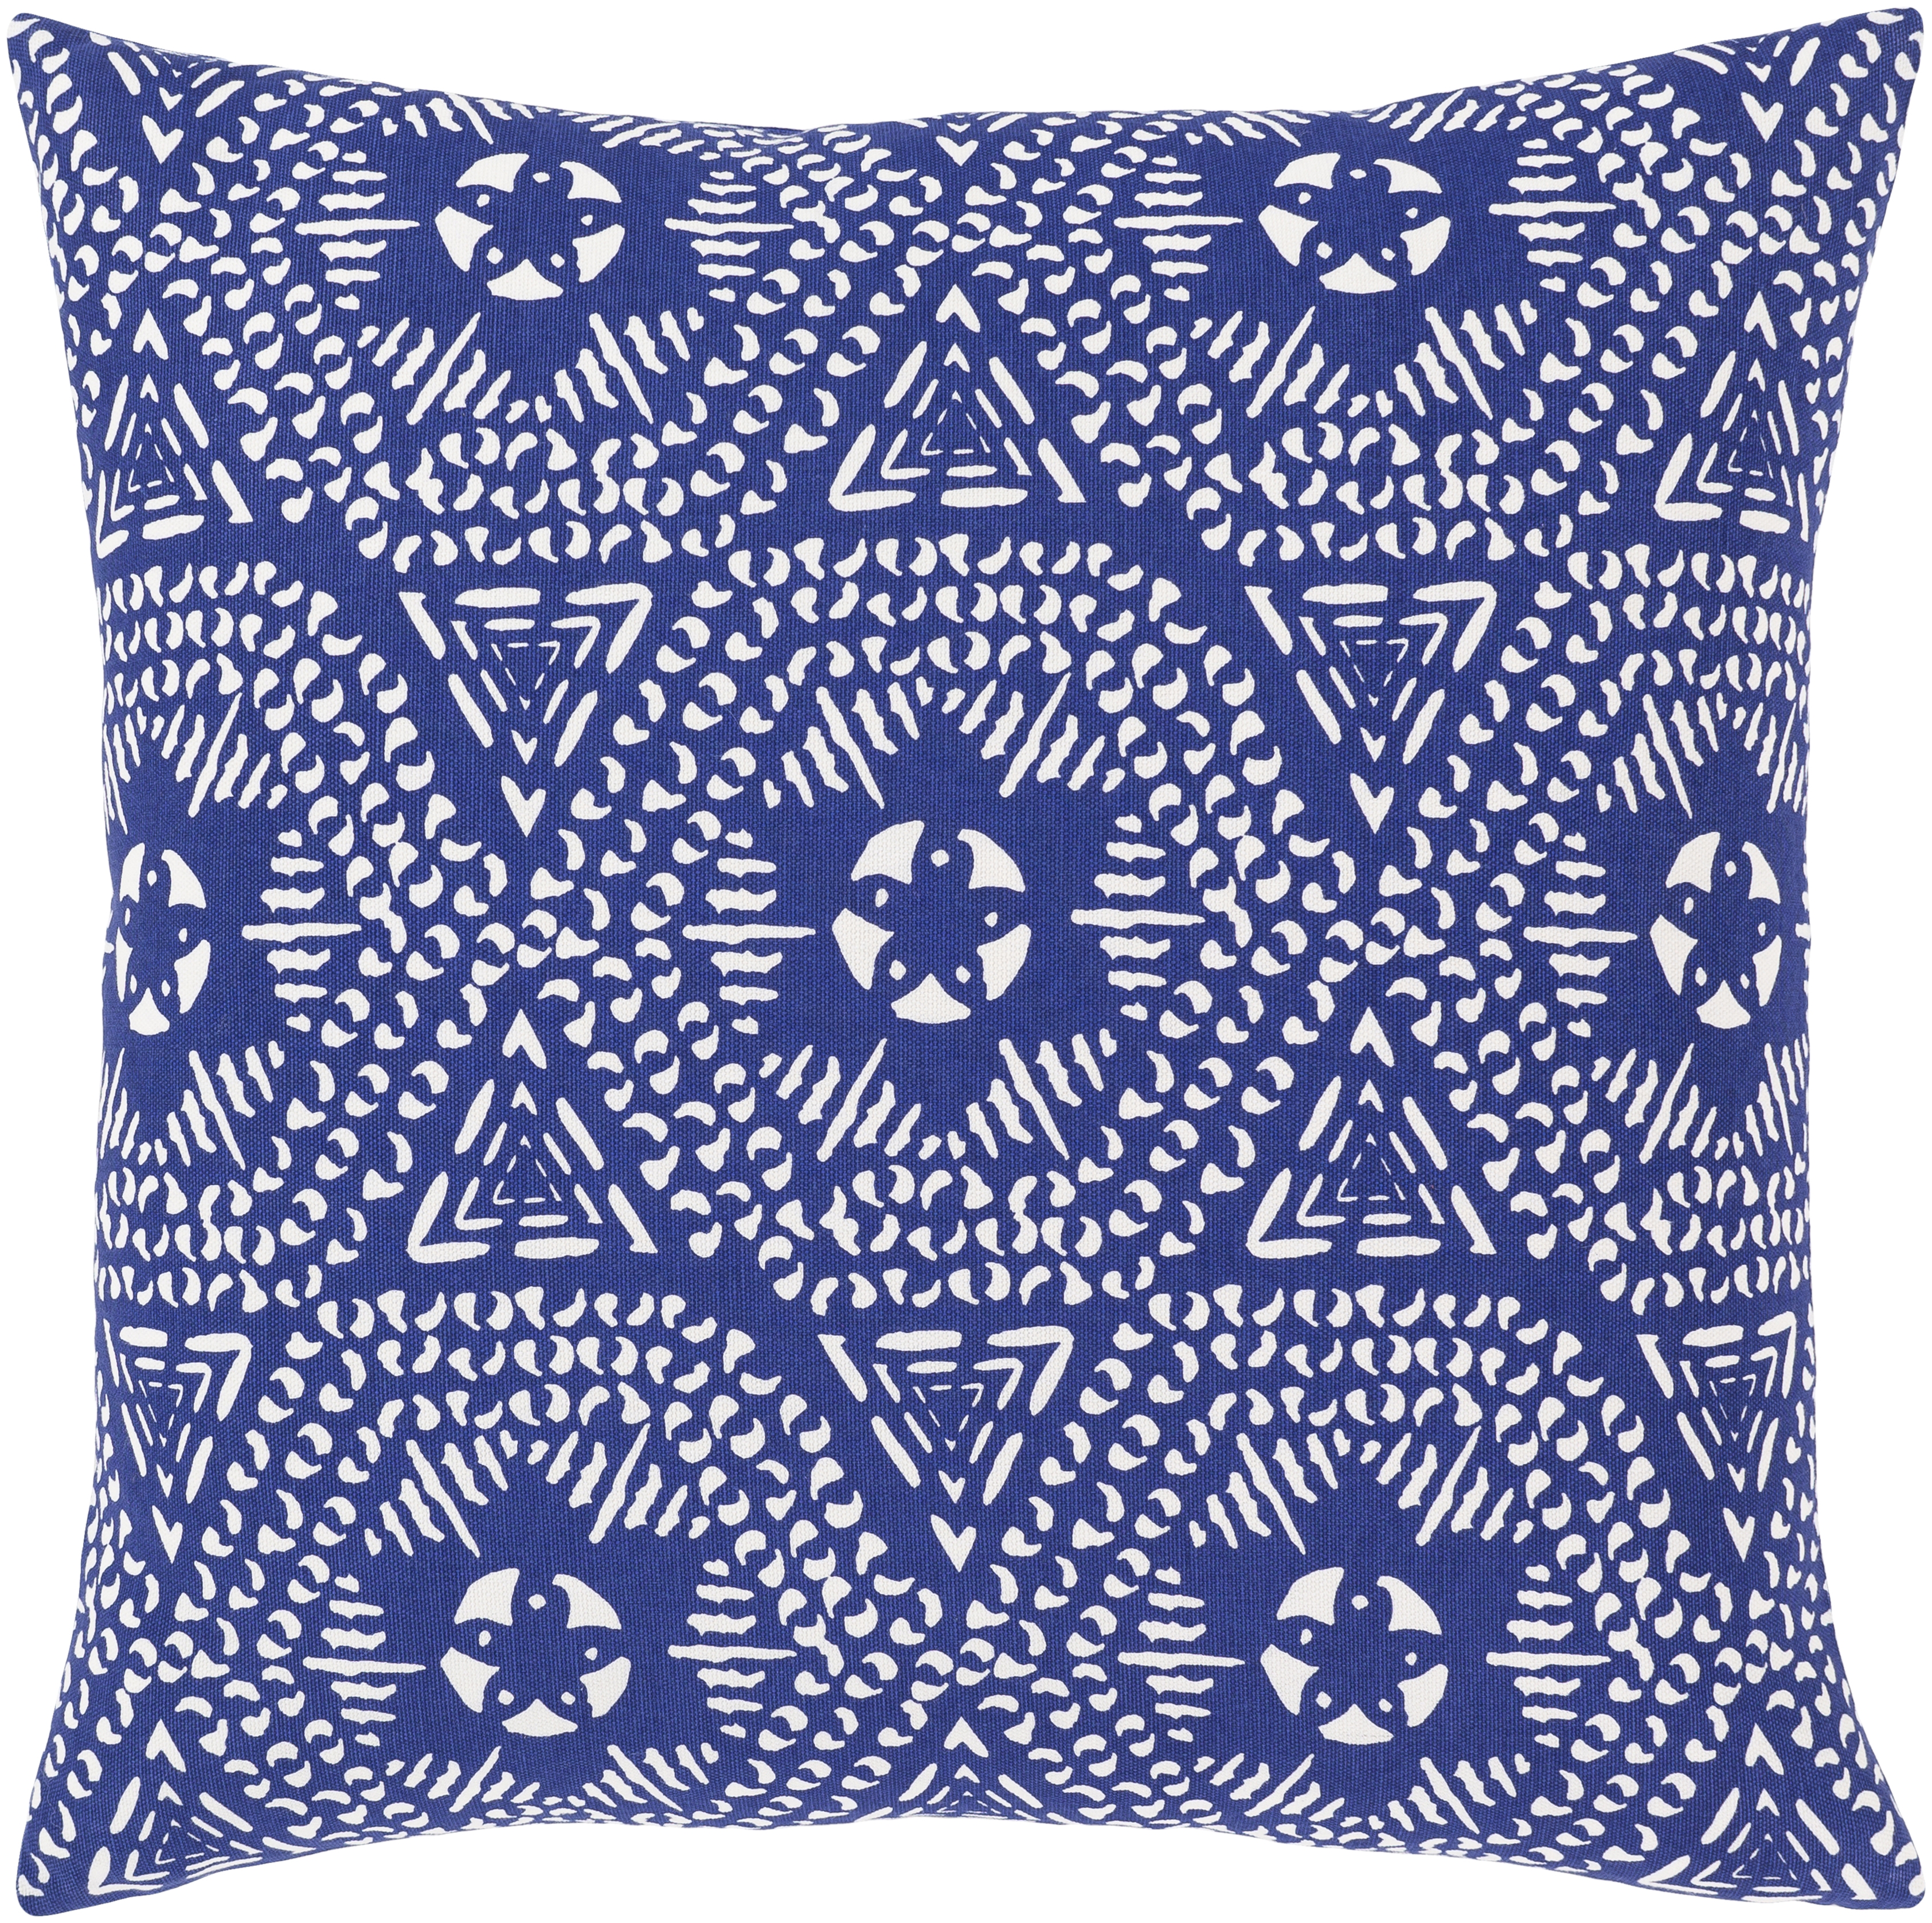 Global Blues Throw Pillow, 18" x 18", pillow cover only - Image 0